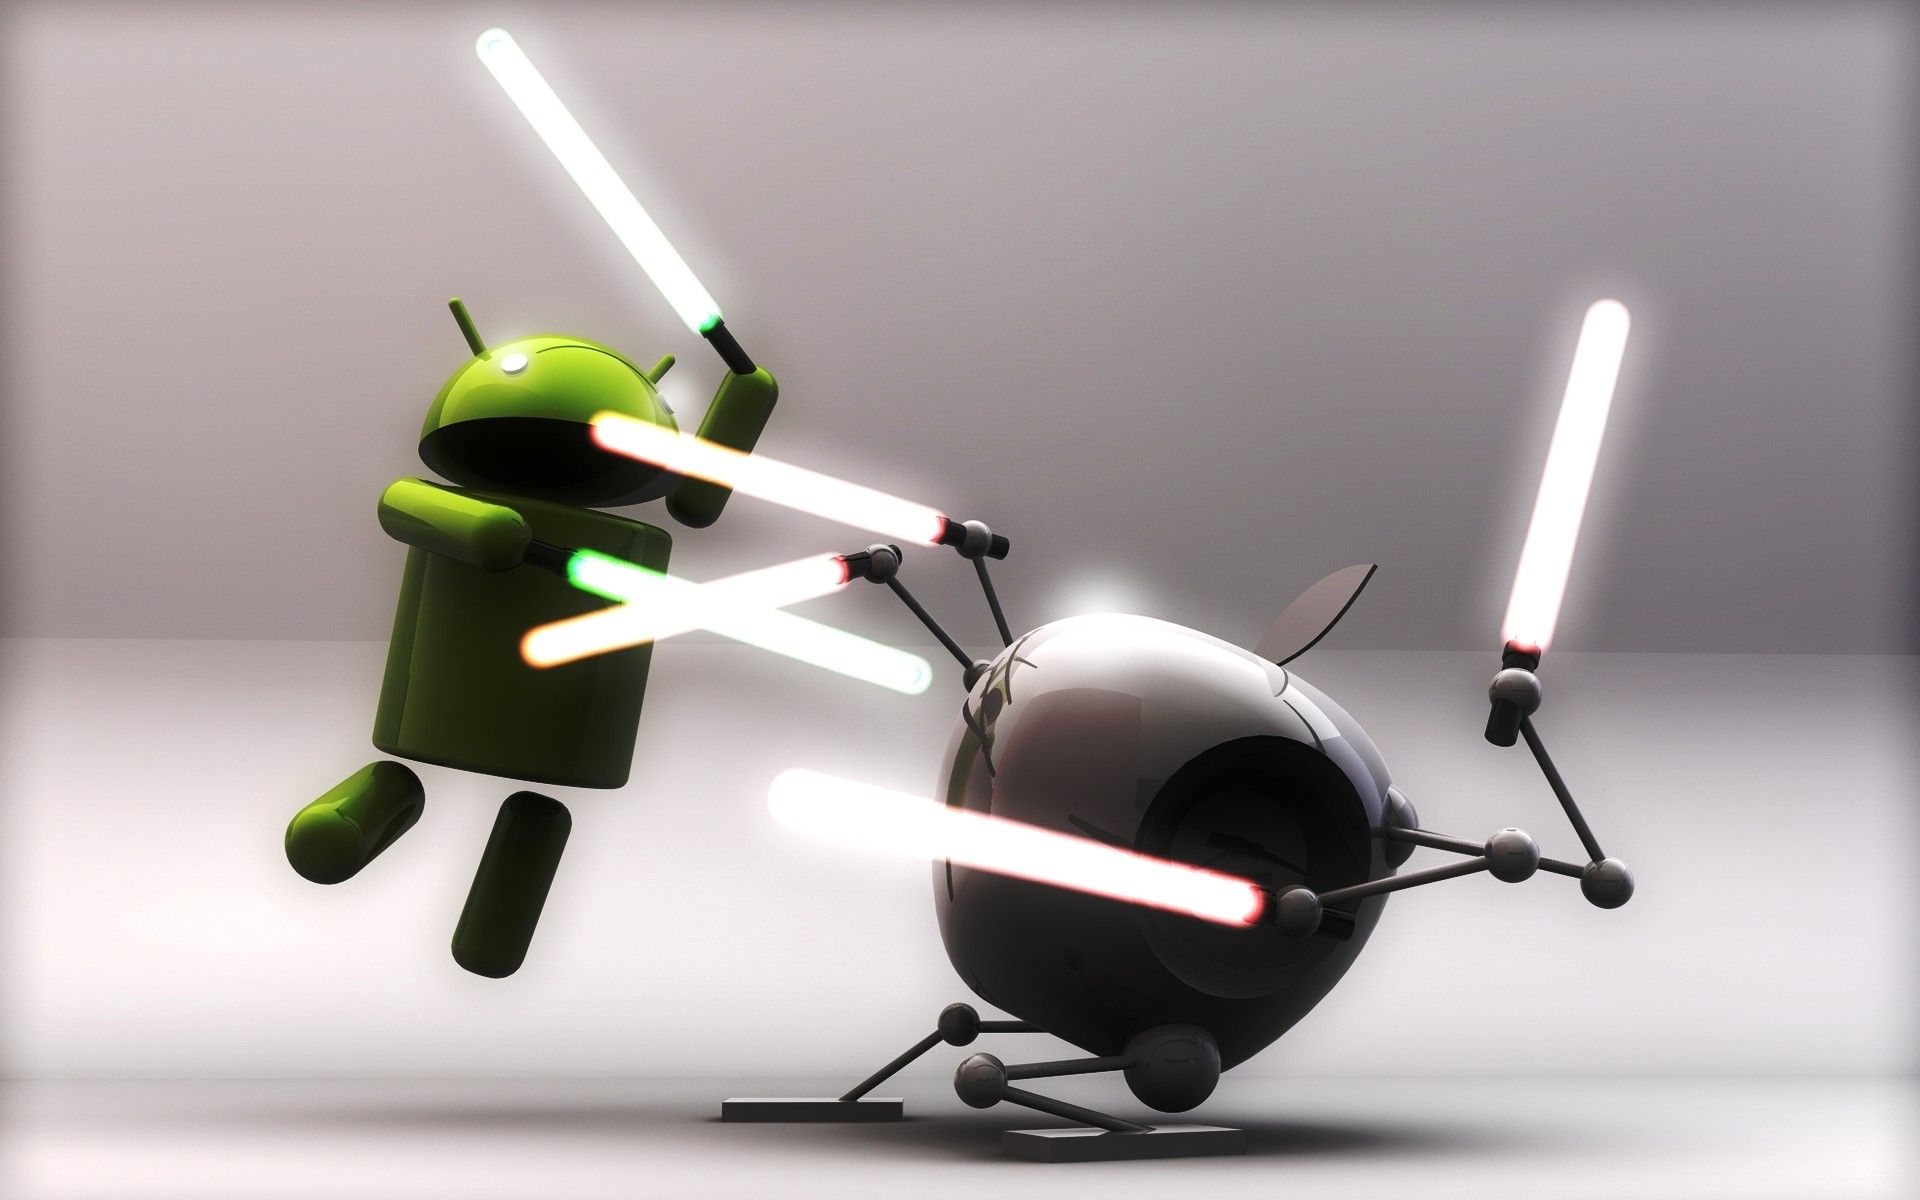 Apple Vs Android Wallpaper Full HD Search